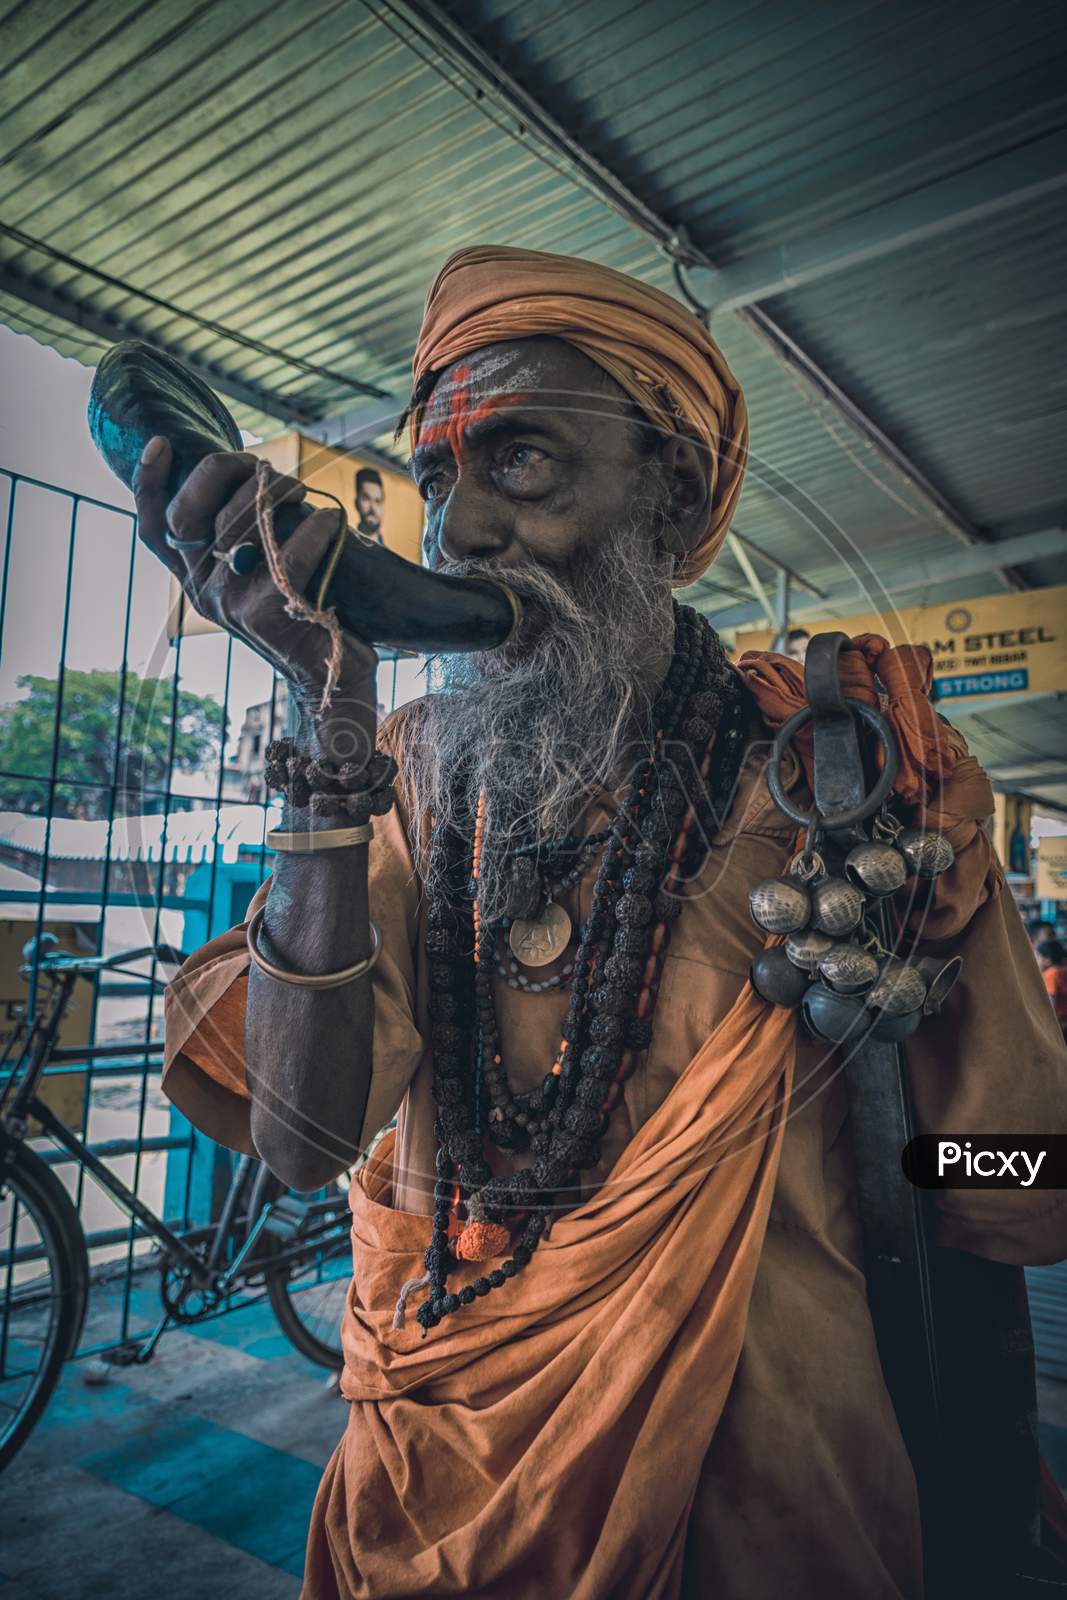 Tarakeswar, India – April 21 2019; An Unidentified Sadhu Blows Conch At Baba Taraknath Temple, A Hindu Temple Dedicated To God Shiva. The Temple Is An Atchala Structure Of Bengal Temple Architecture.